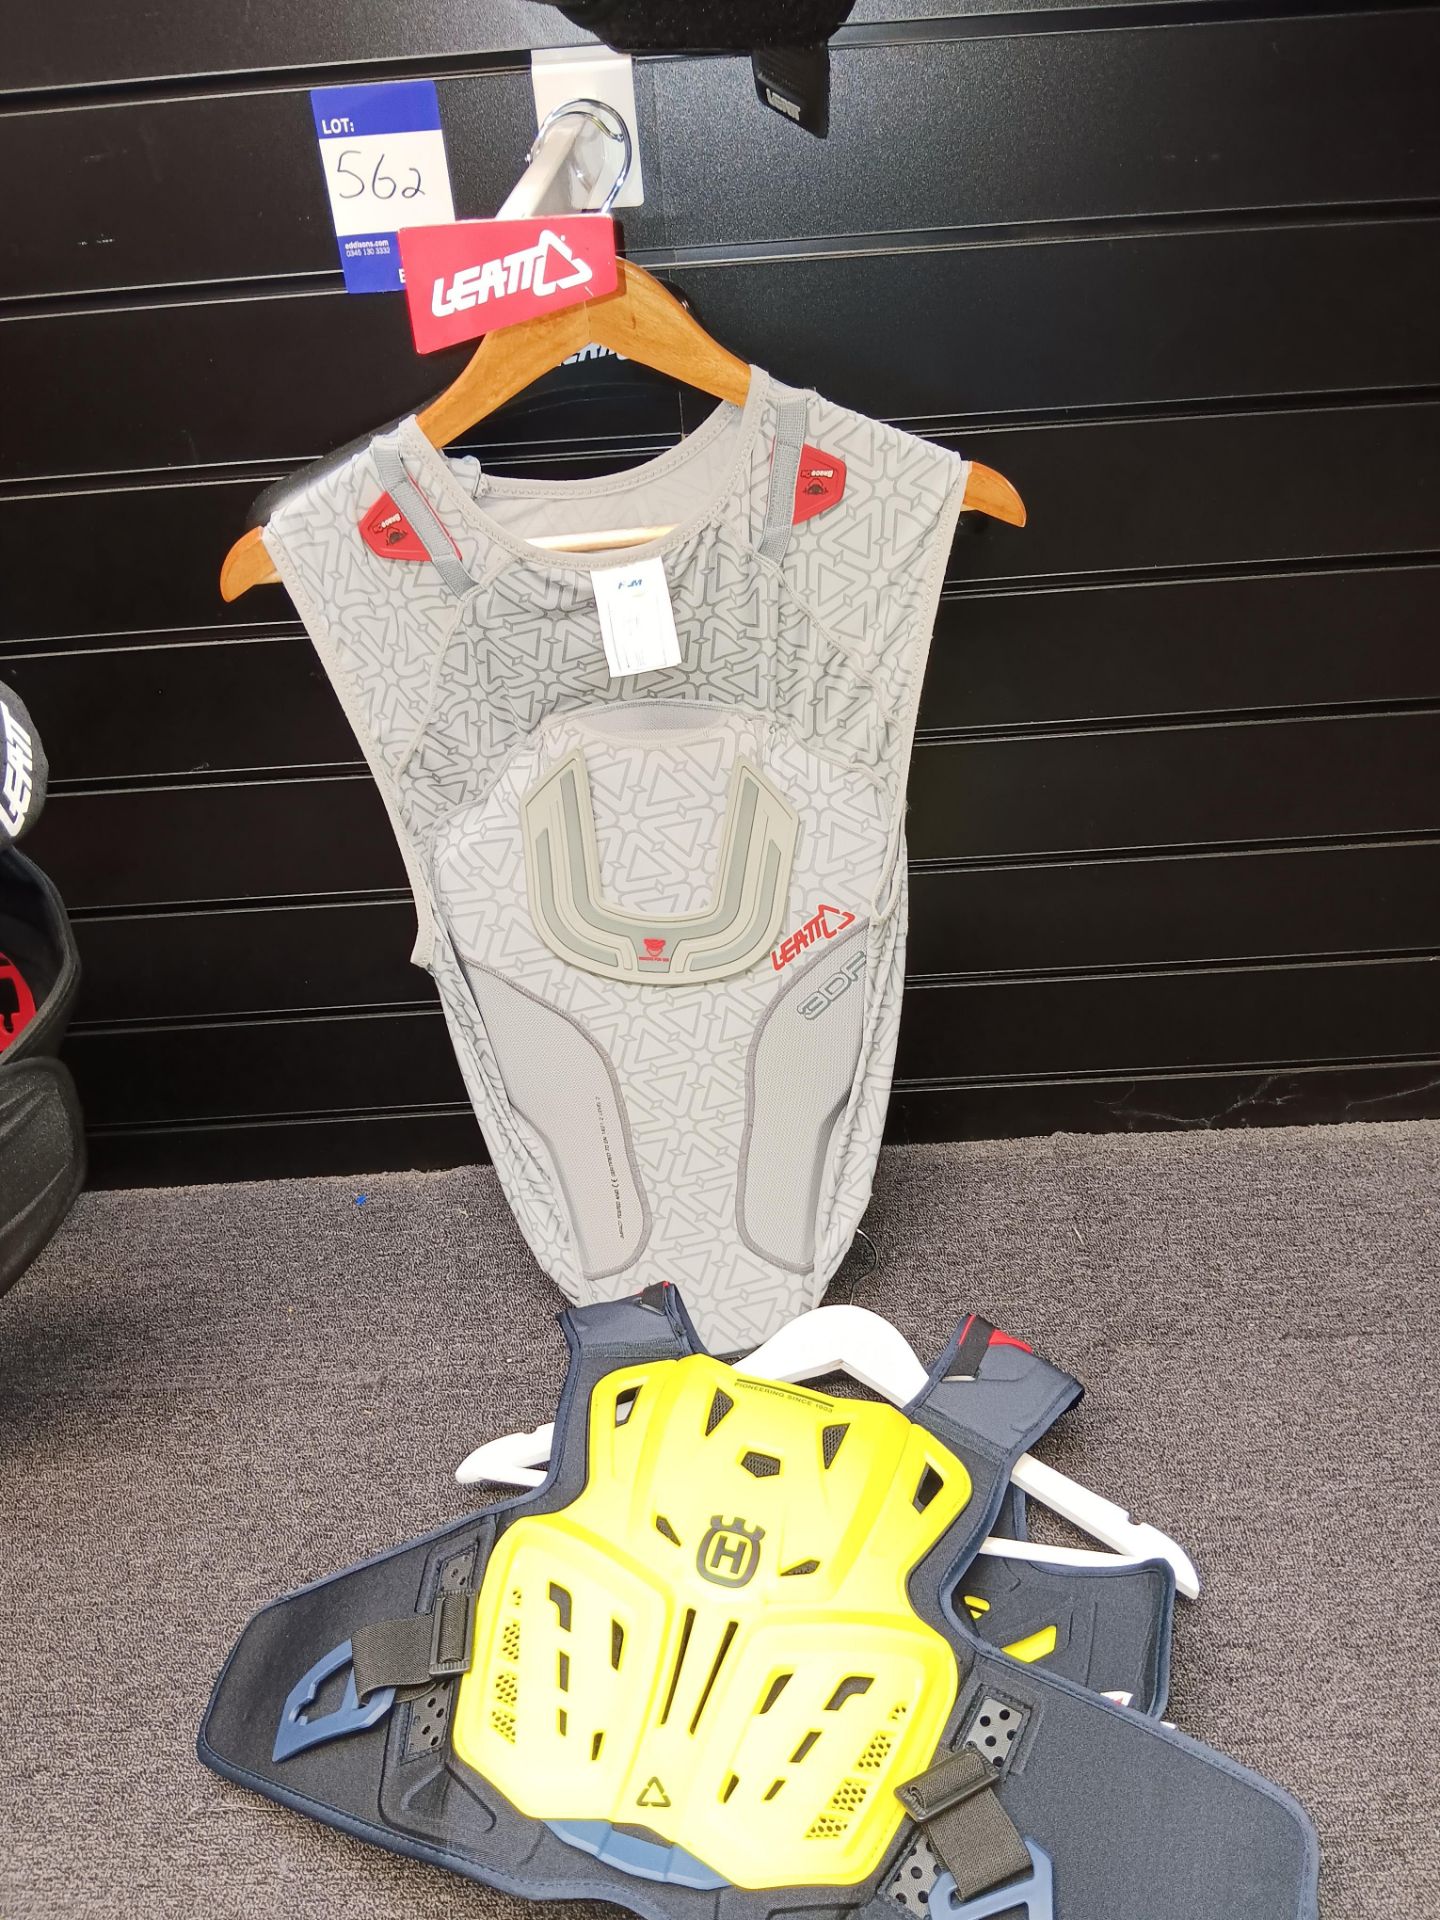 LEATT BACK PROTECTOR 3DF GREY L/XL 172-184cm,KIDS 4.5 CHEST PROTECTOR S/M - Image 2 of 2